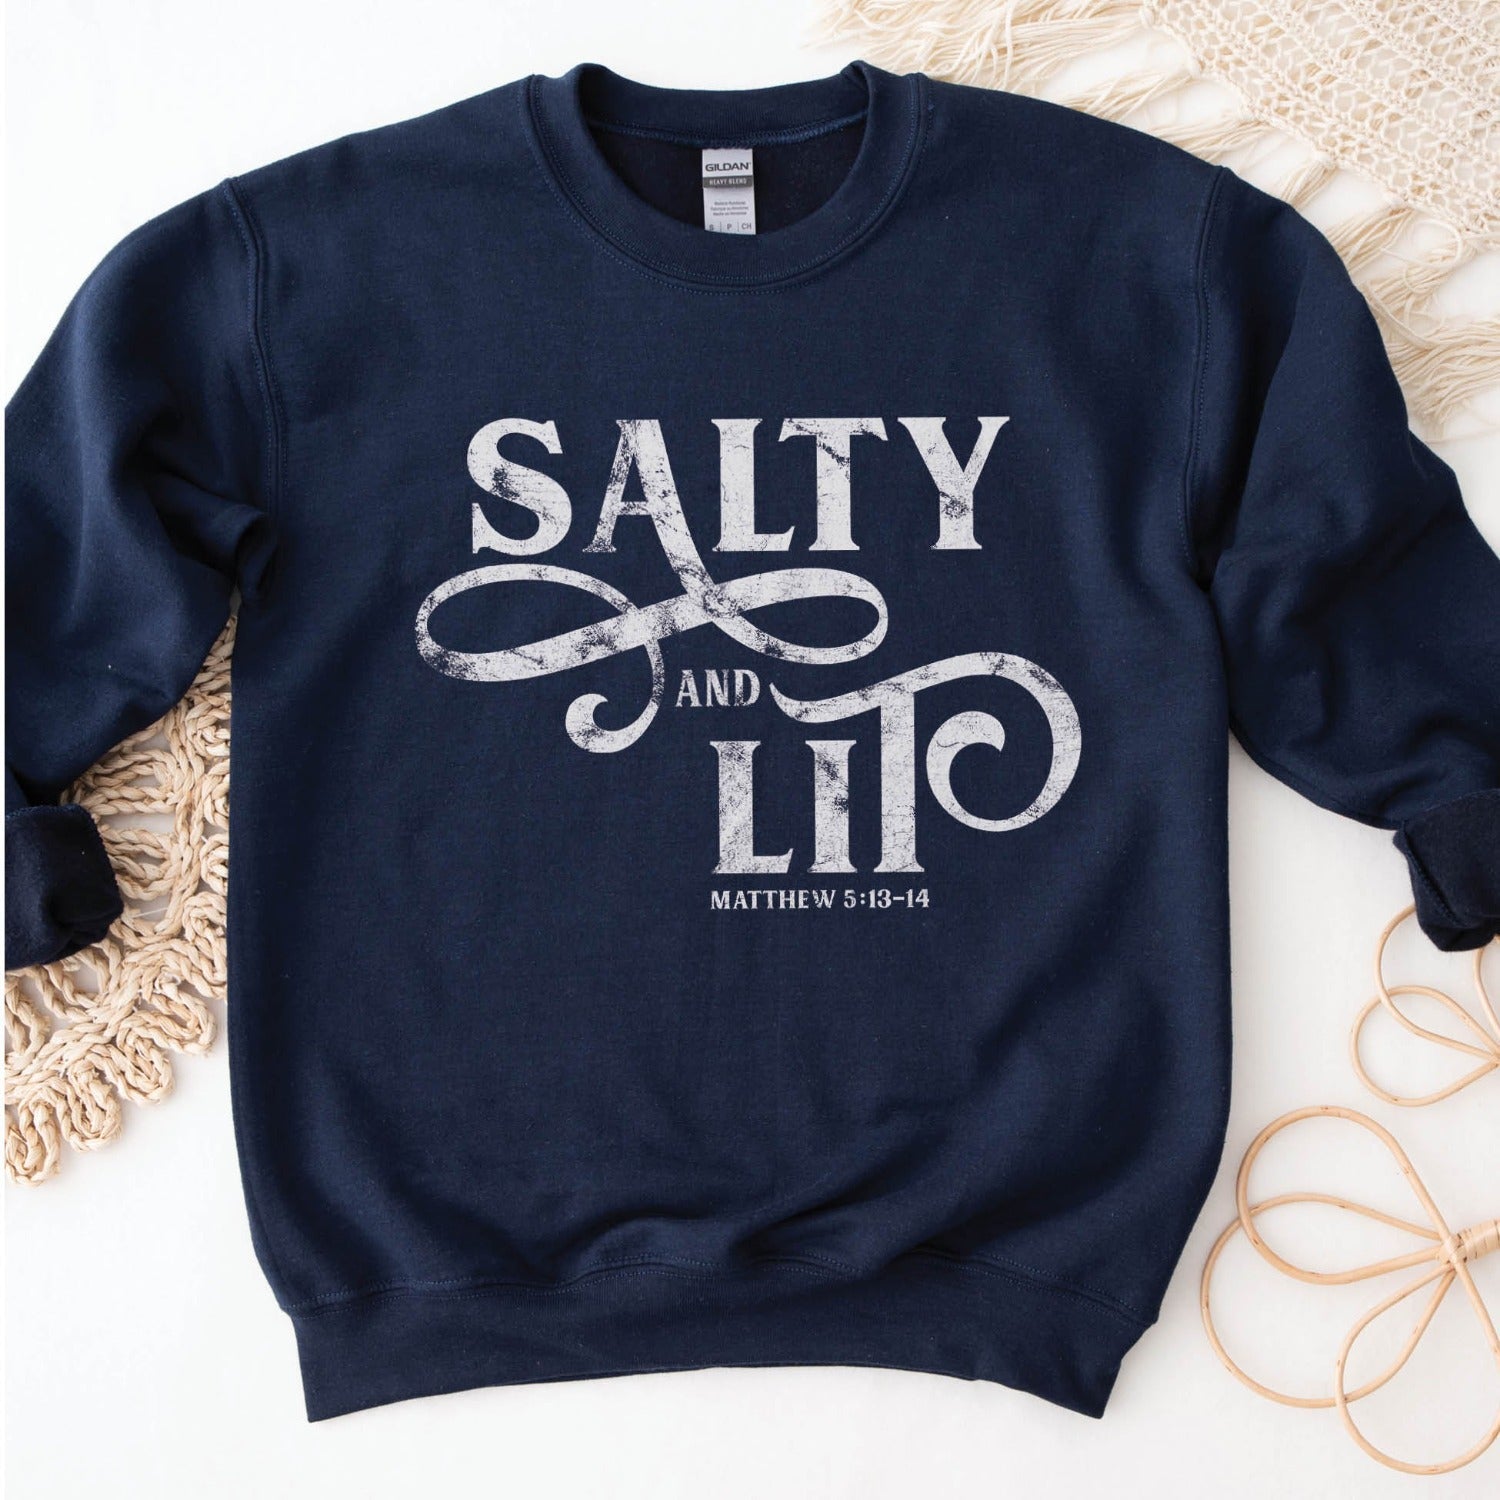 Salty And Lit Matthew 5:13-14 bible verse funny Christian aesthetic unisex crewneck sweatshirt with distressed swirl typography design printed in white on cozy navy blue sweater for women